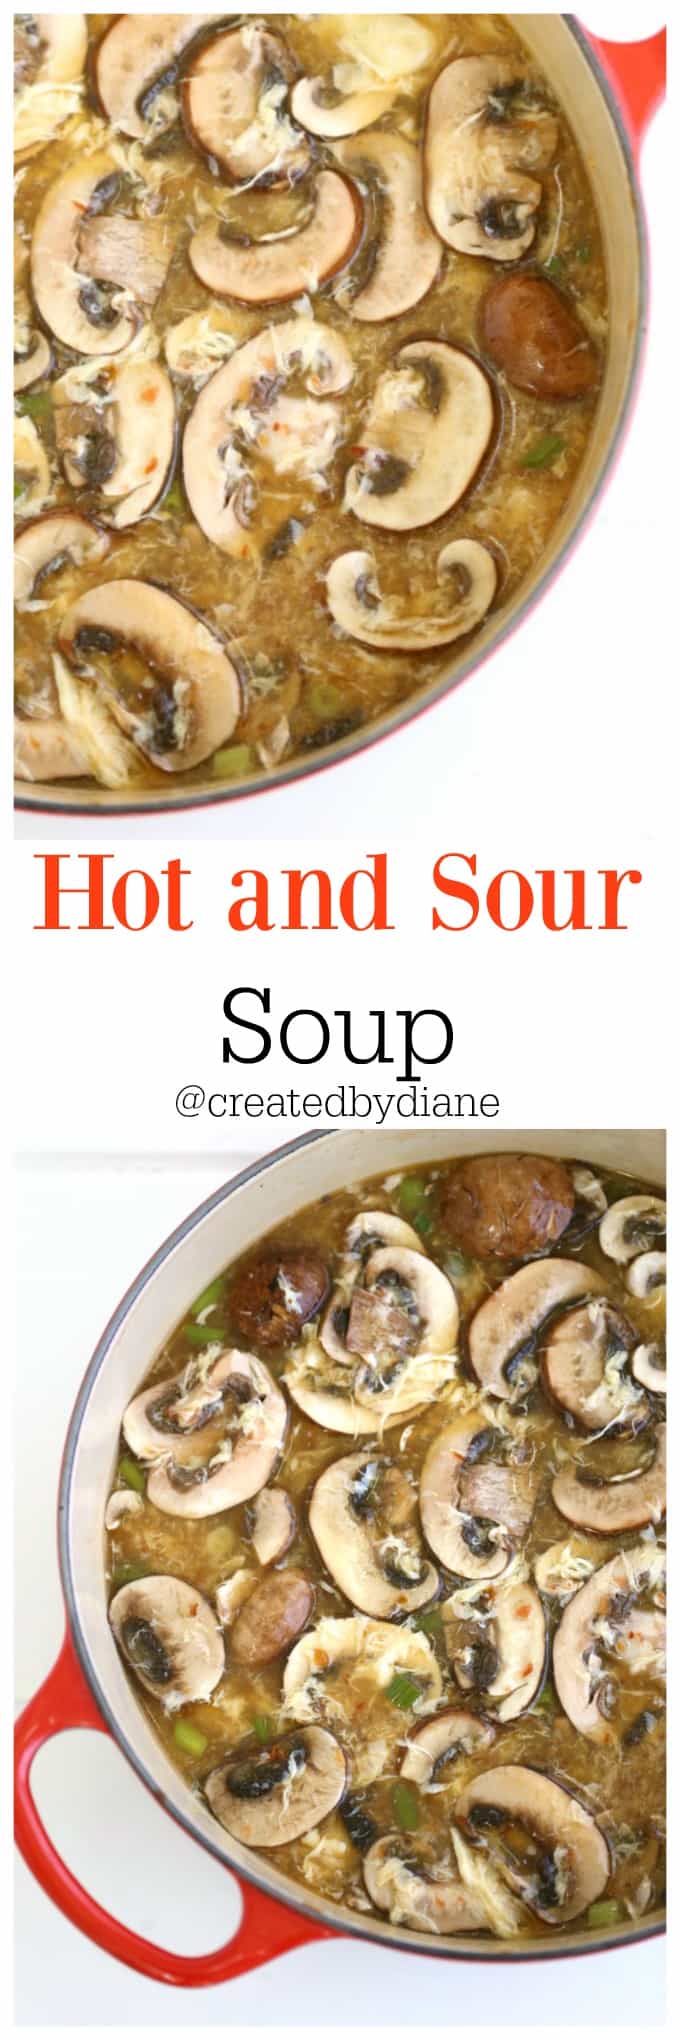 hot and sour soup recipe @createdbydiane